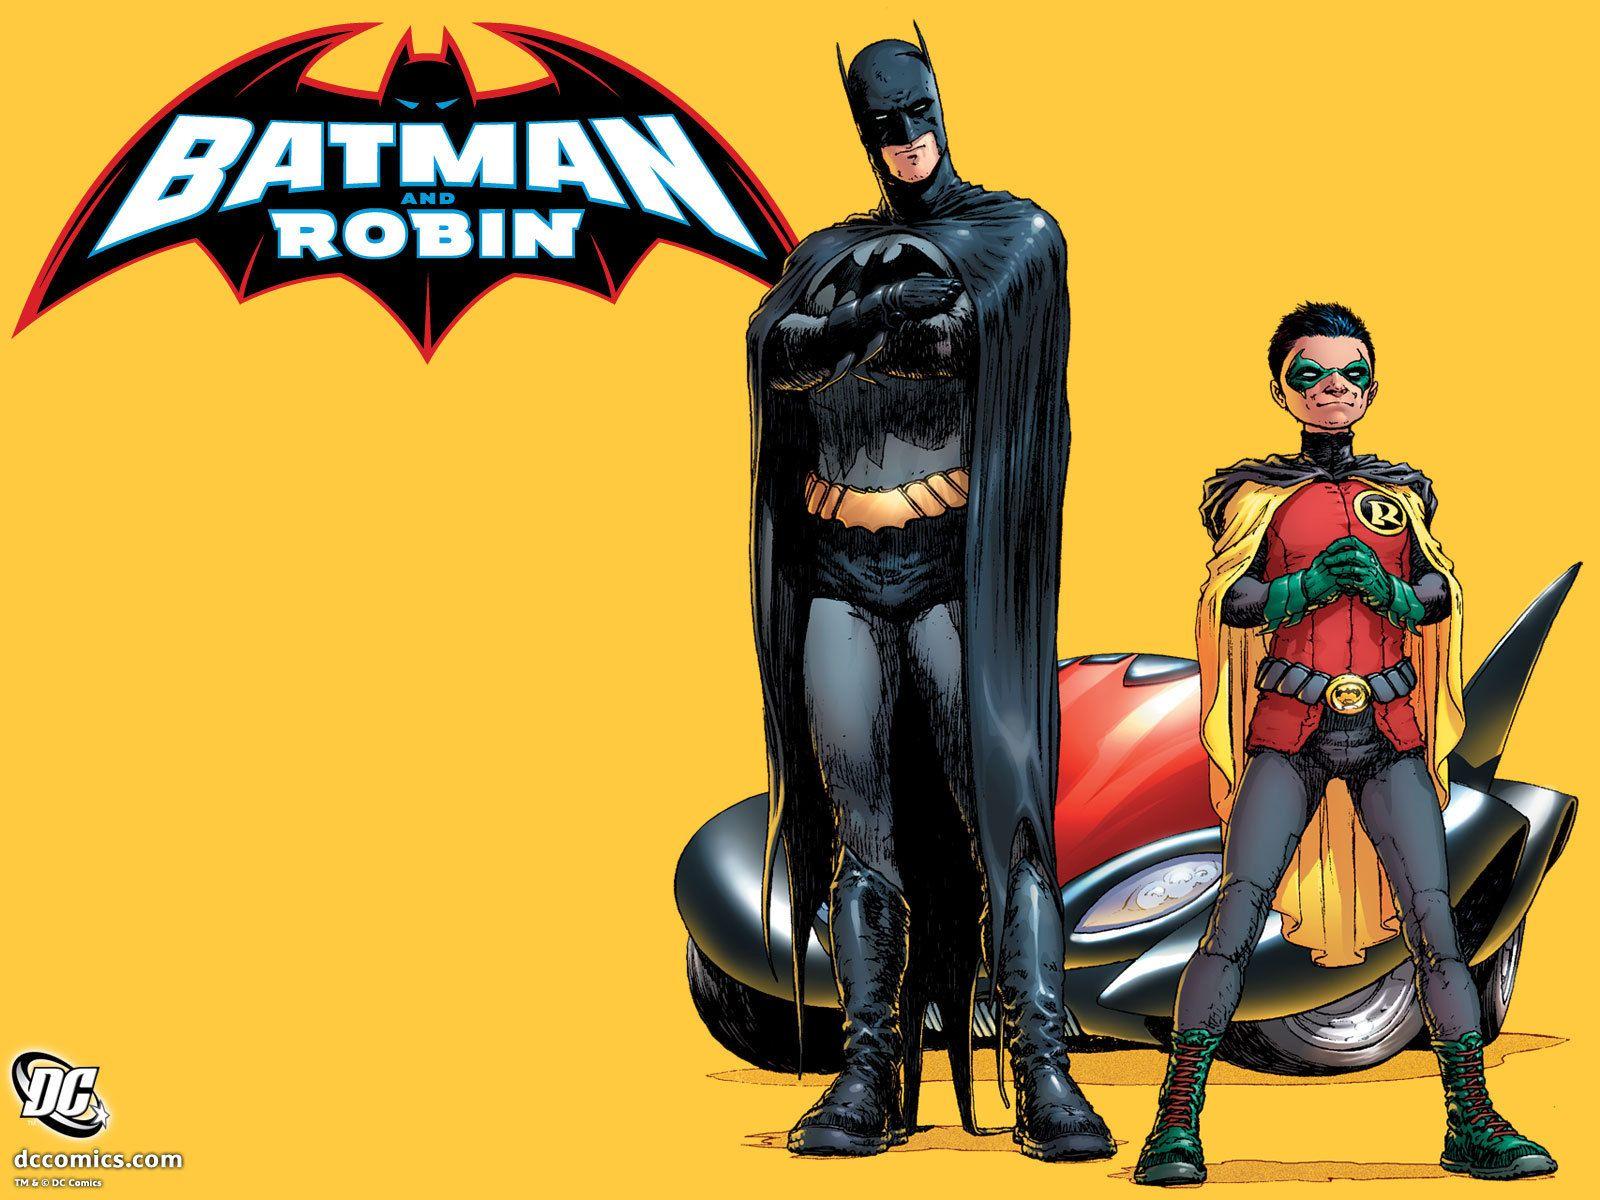 The new Batman and Robin